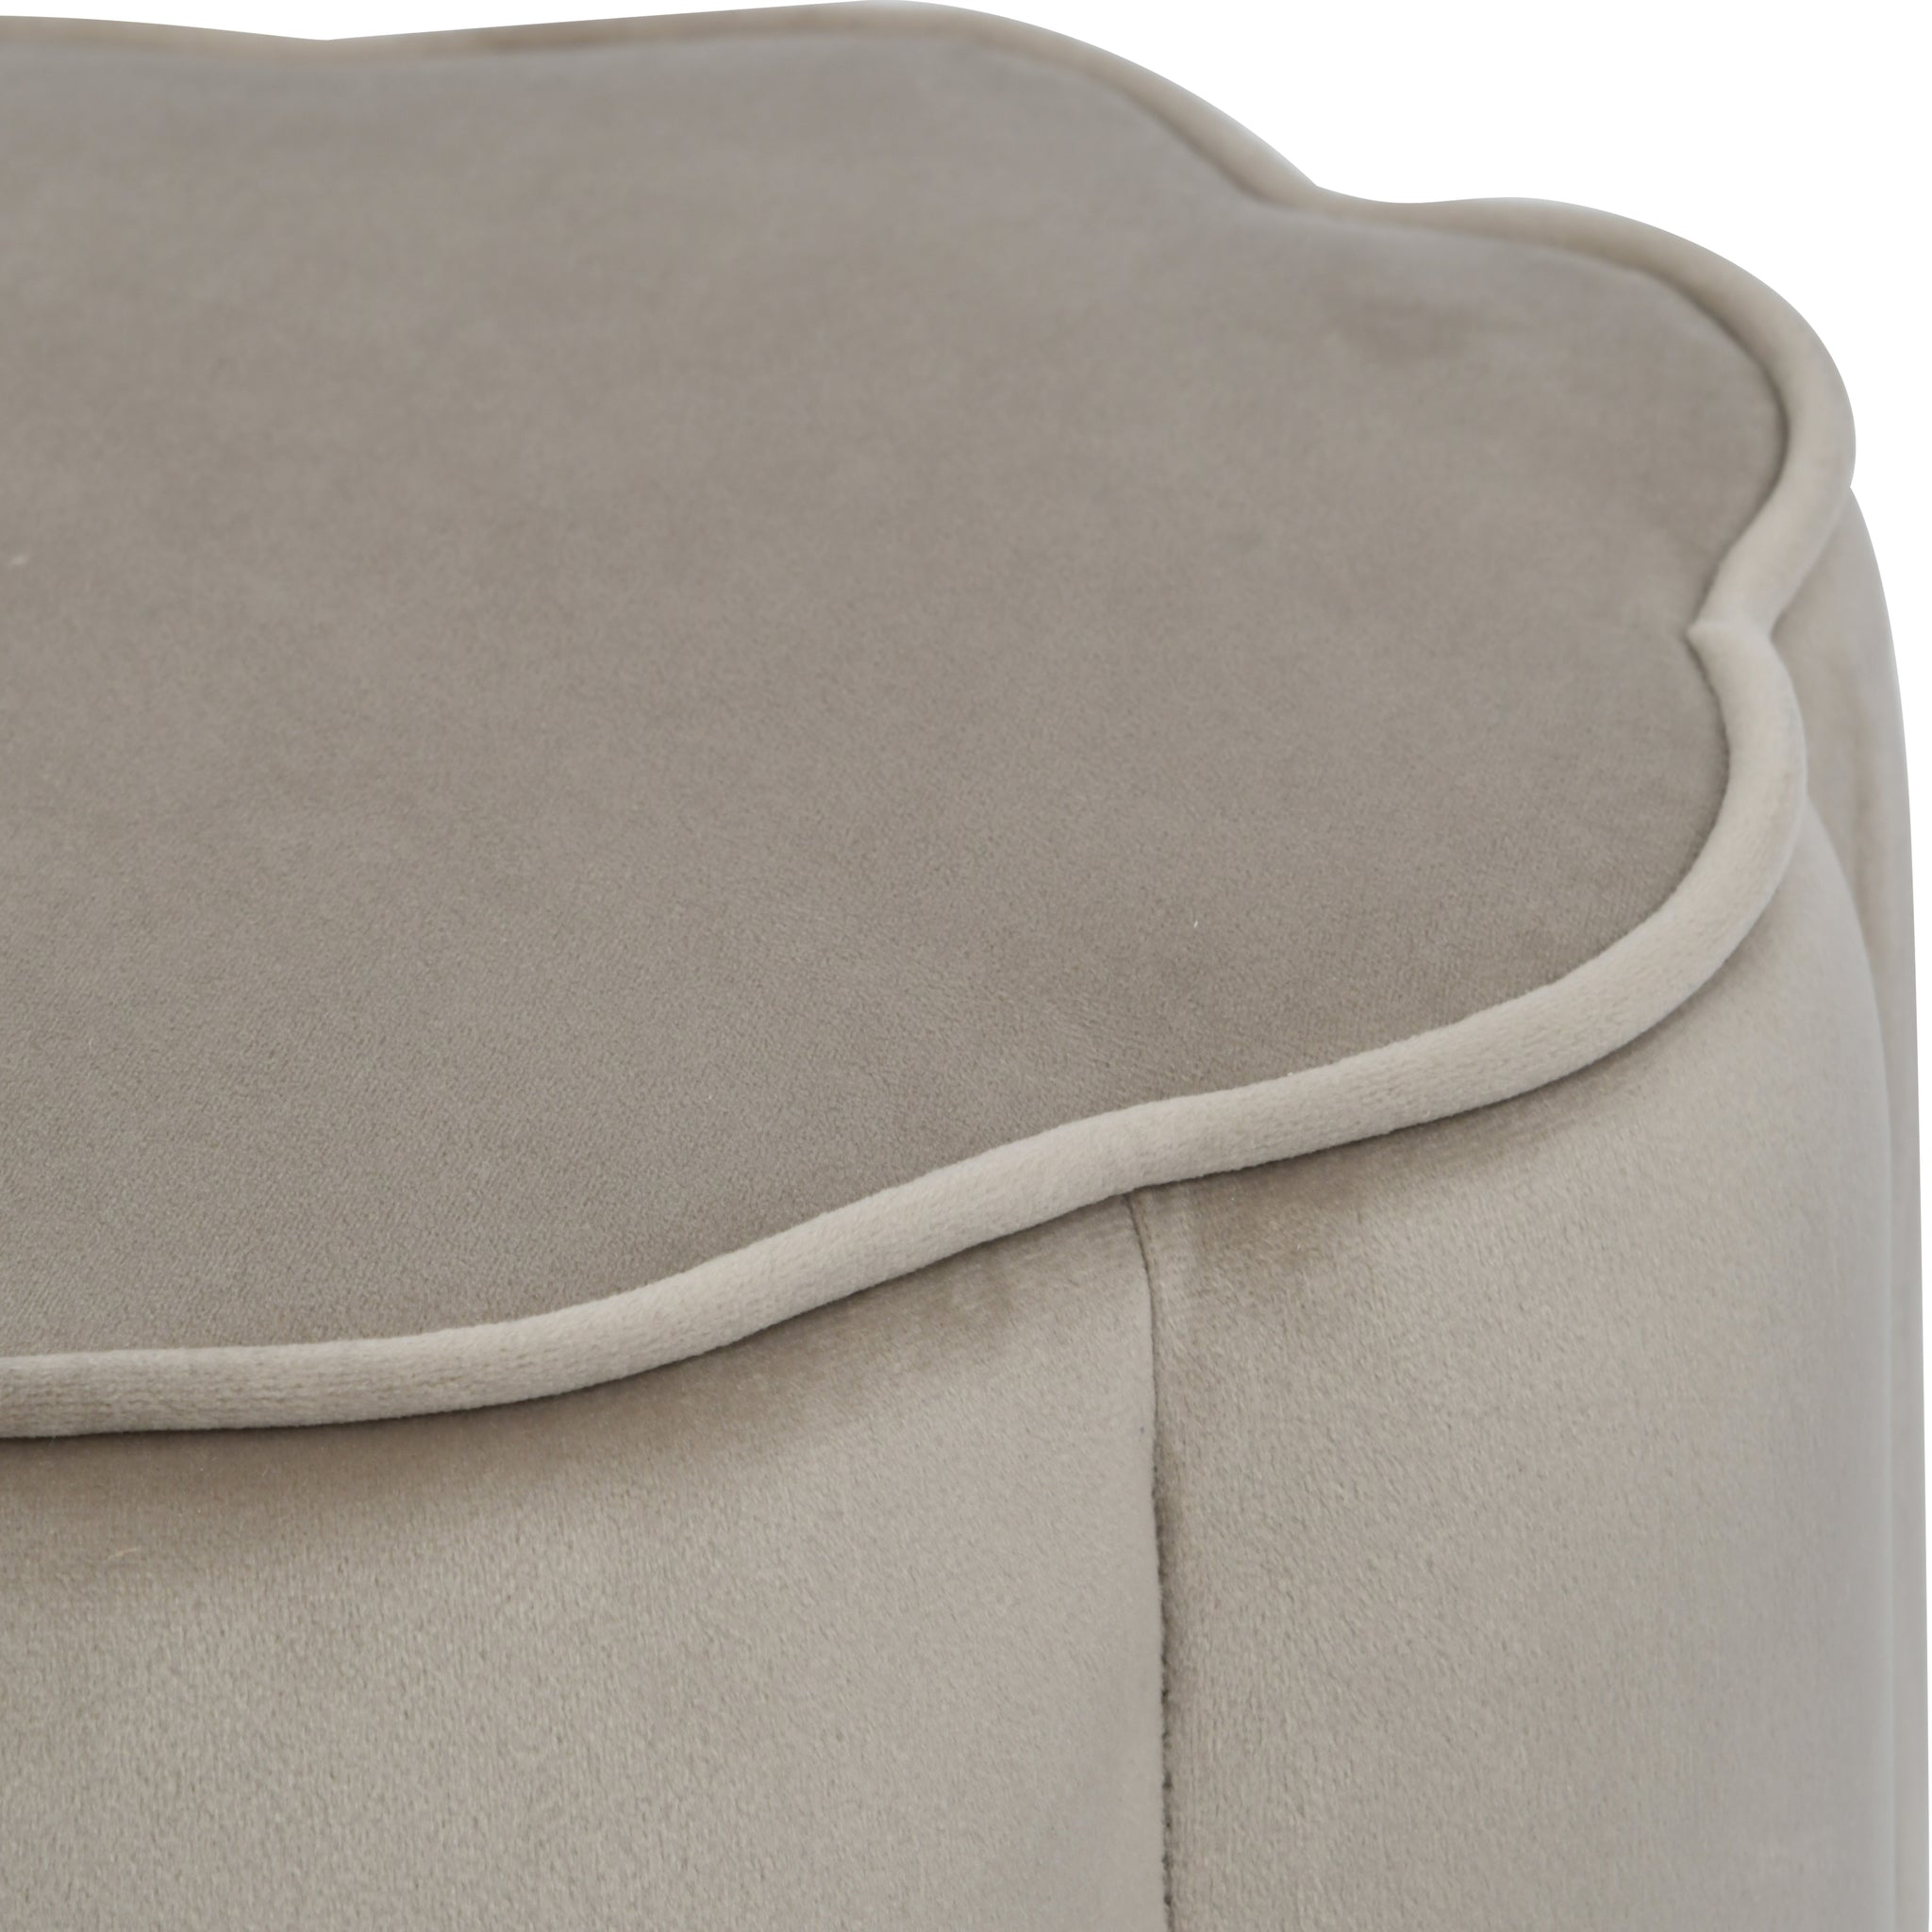 Coral Footstool in Smokey Taupe Velvet